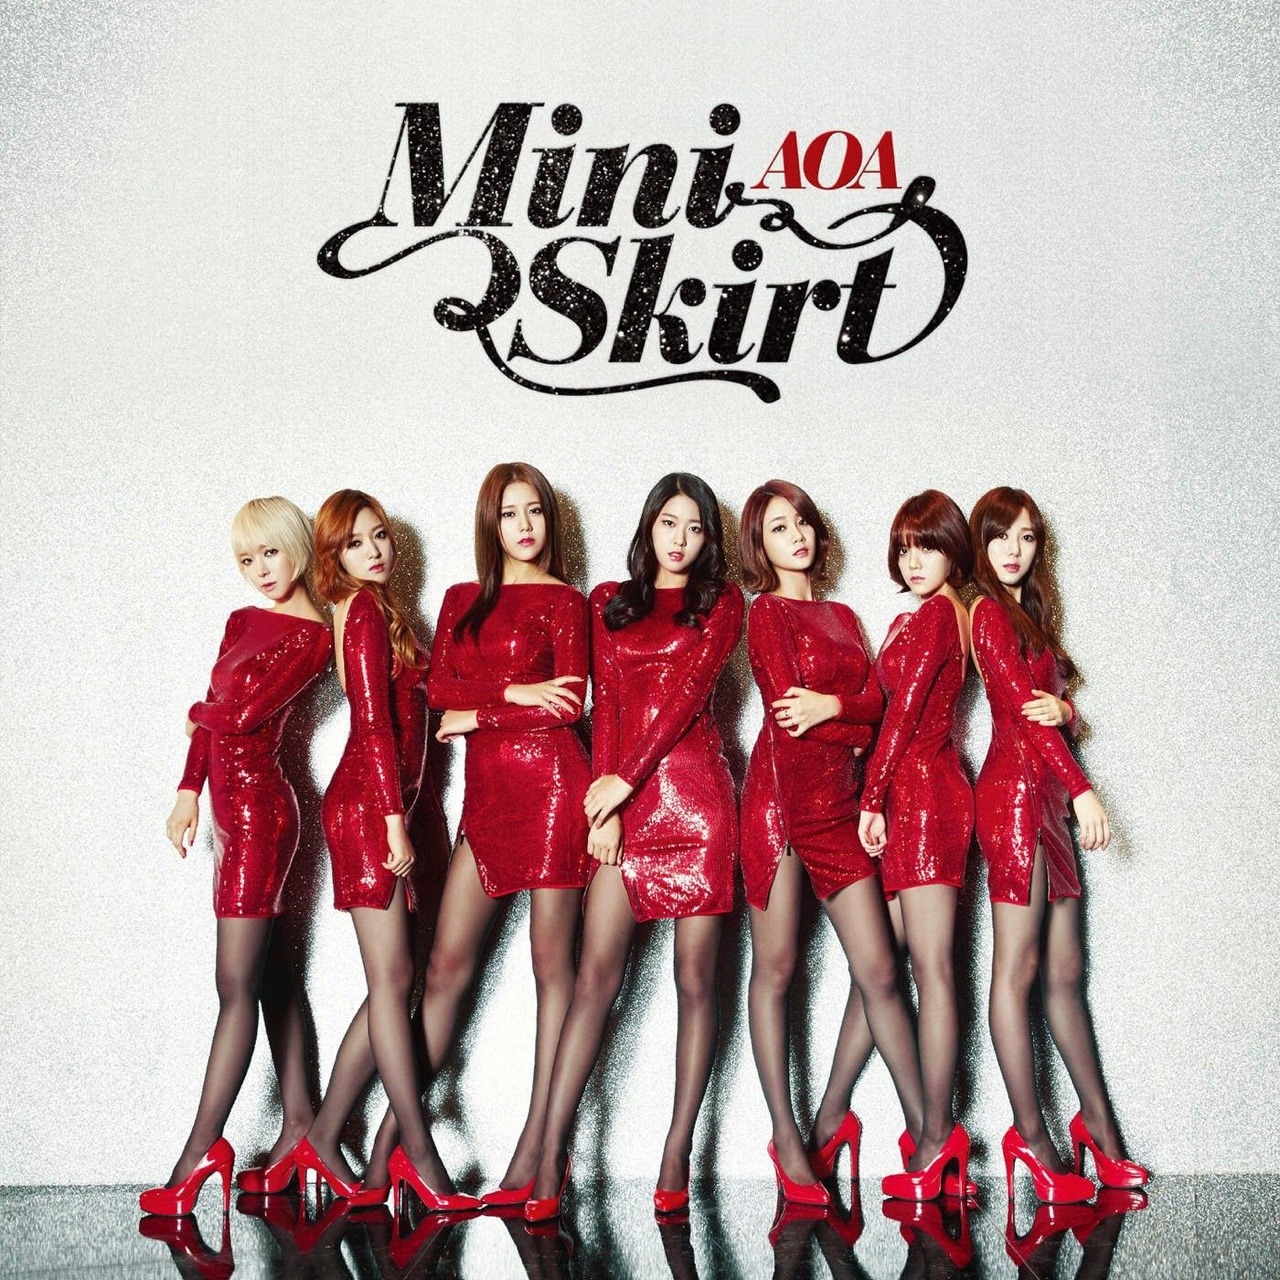 razumichin2: Kpop group AOA in red dresses, black tights and red high heeled pumps